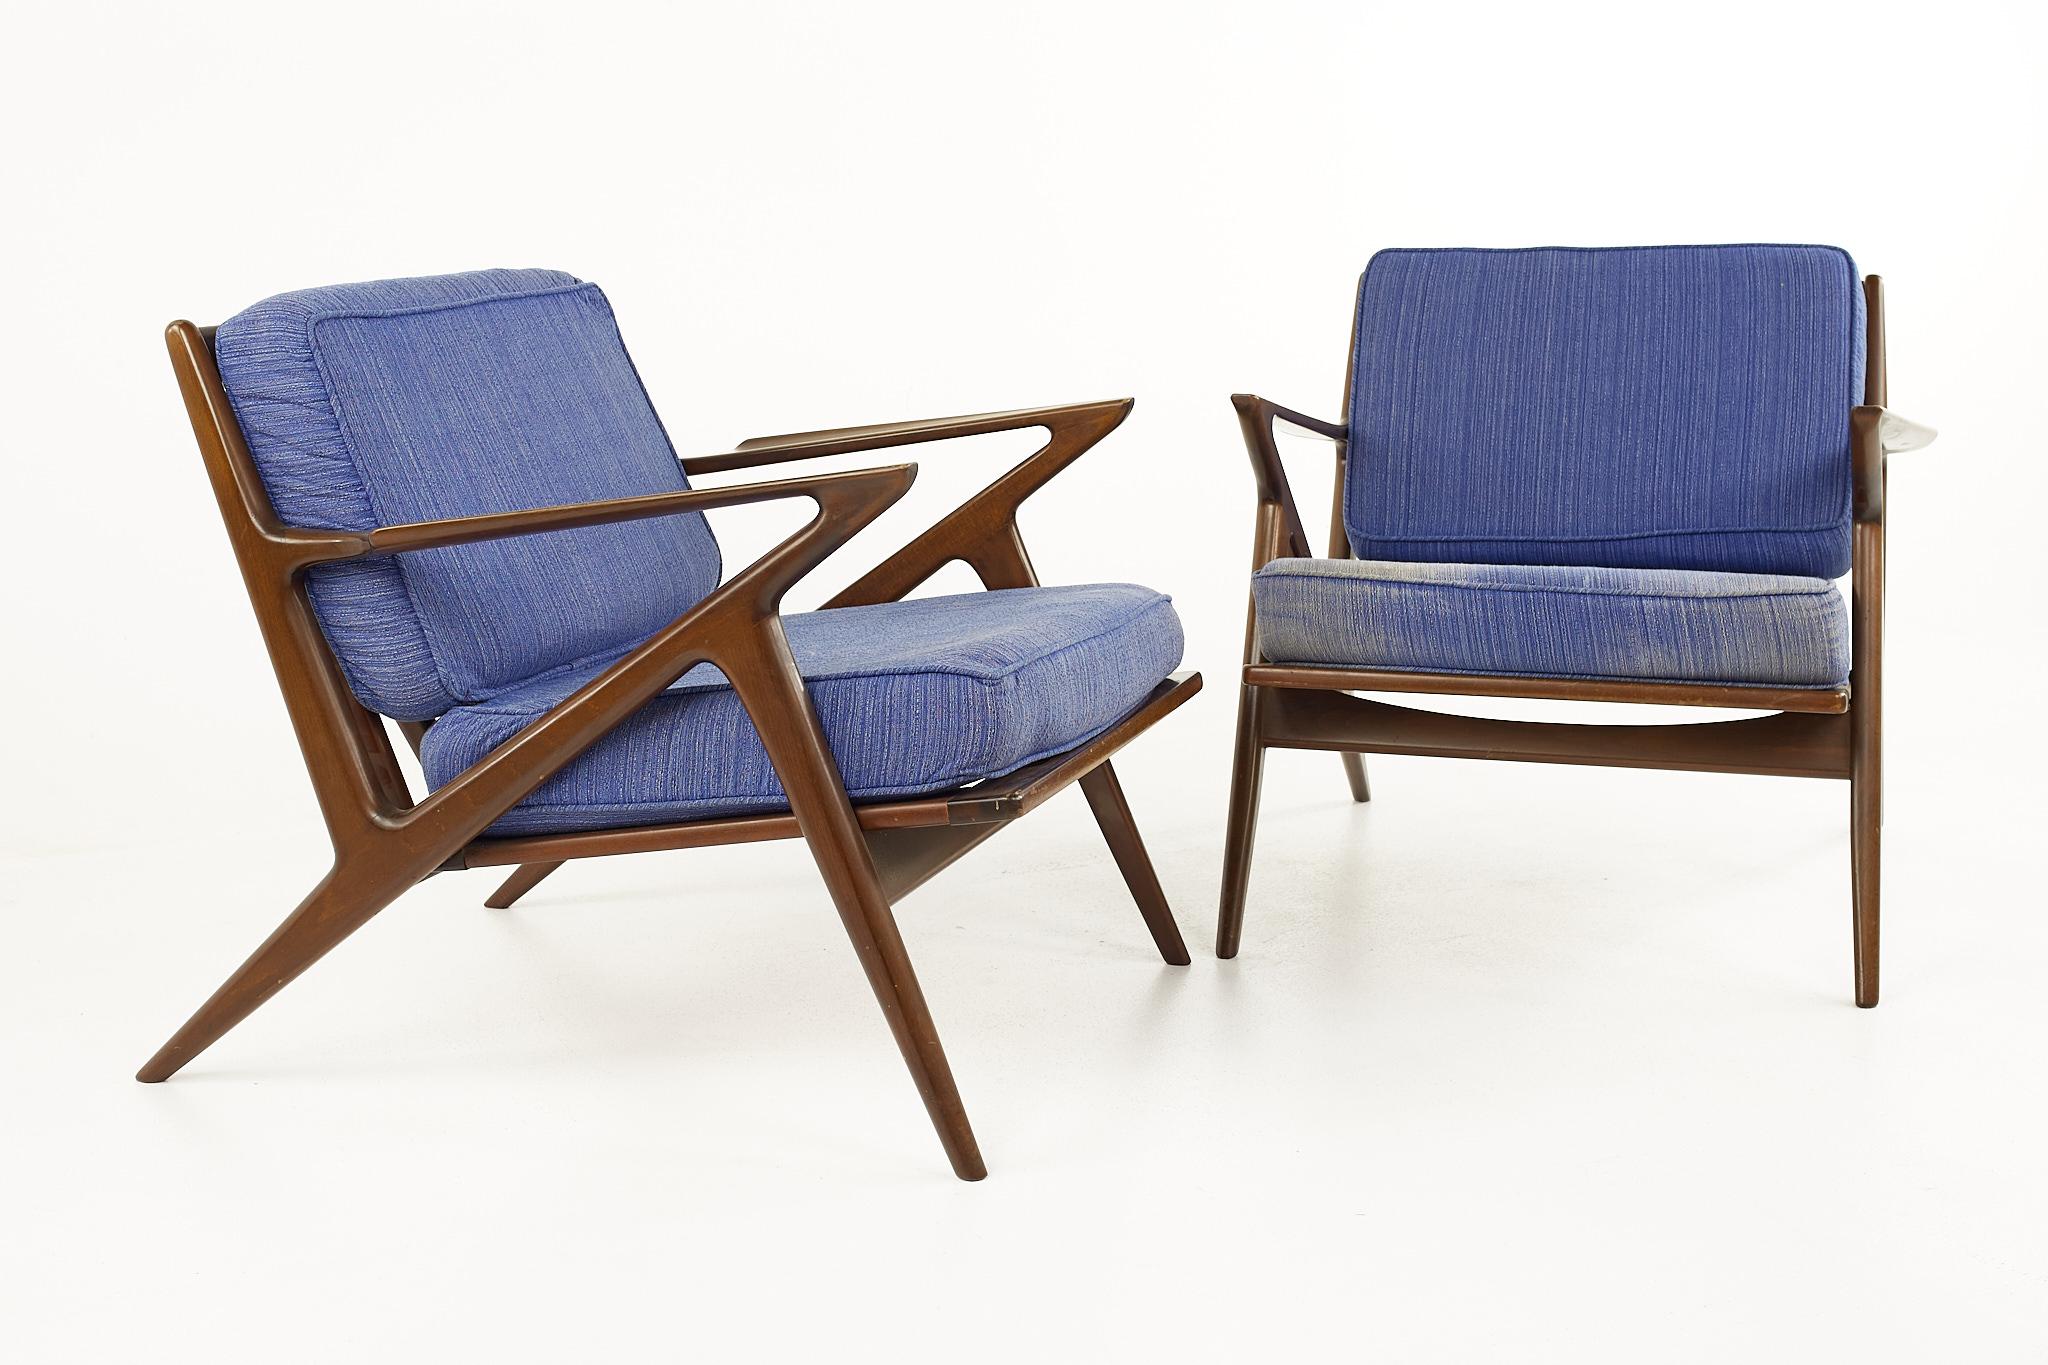 Poul Jensen Mid Century Z lounge chairs - Pair 

Each chair measures: 29.5 wide x 29.75 deep x 26.5 inches high, with a seat height of 15.75 and arm height of 22.25 inches

All pieces of furniture can be had in what we call restored vintage